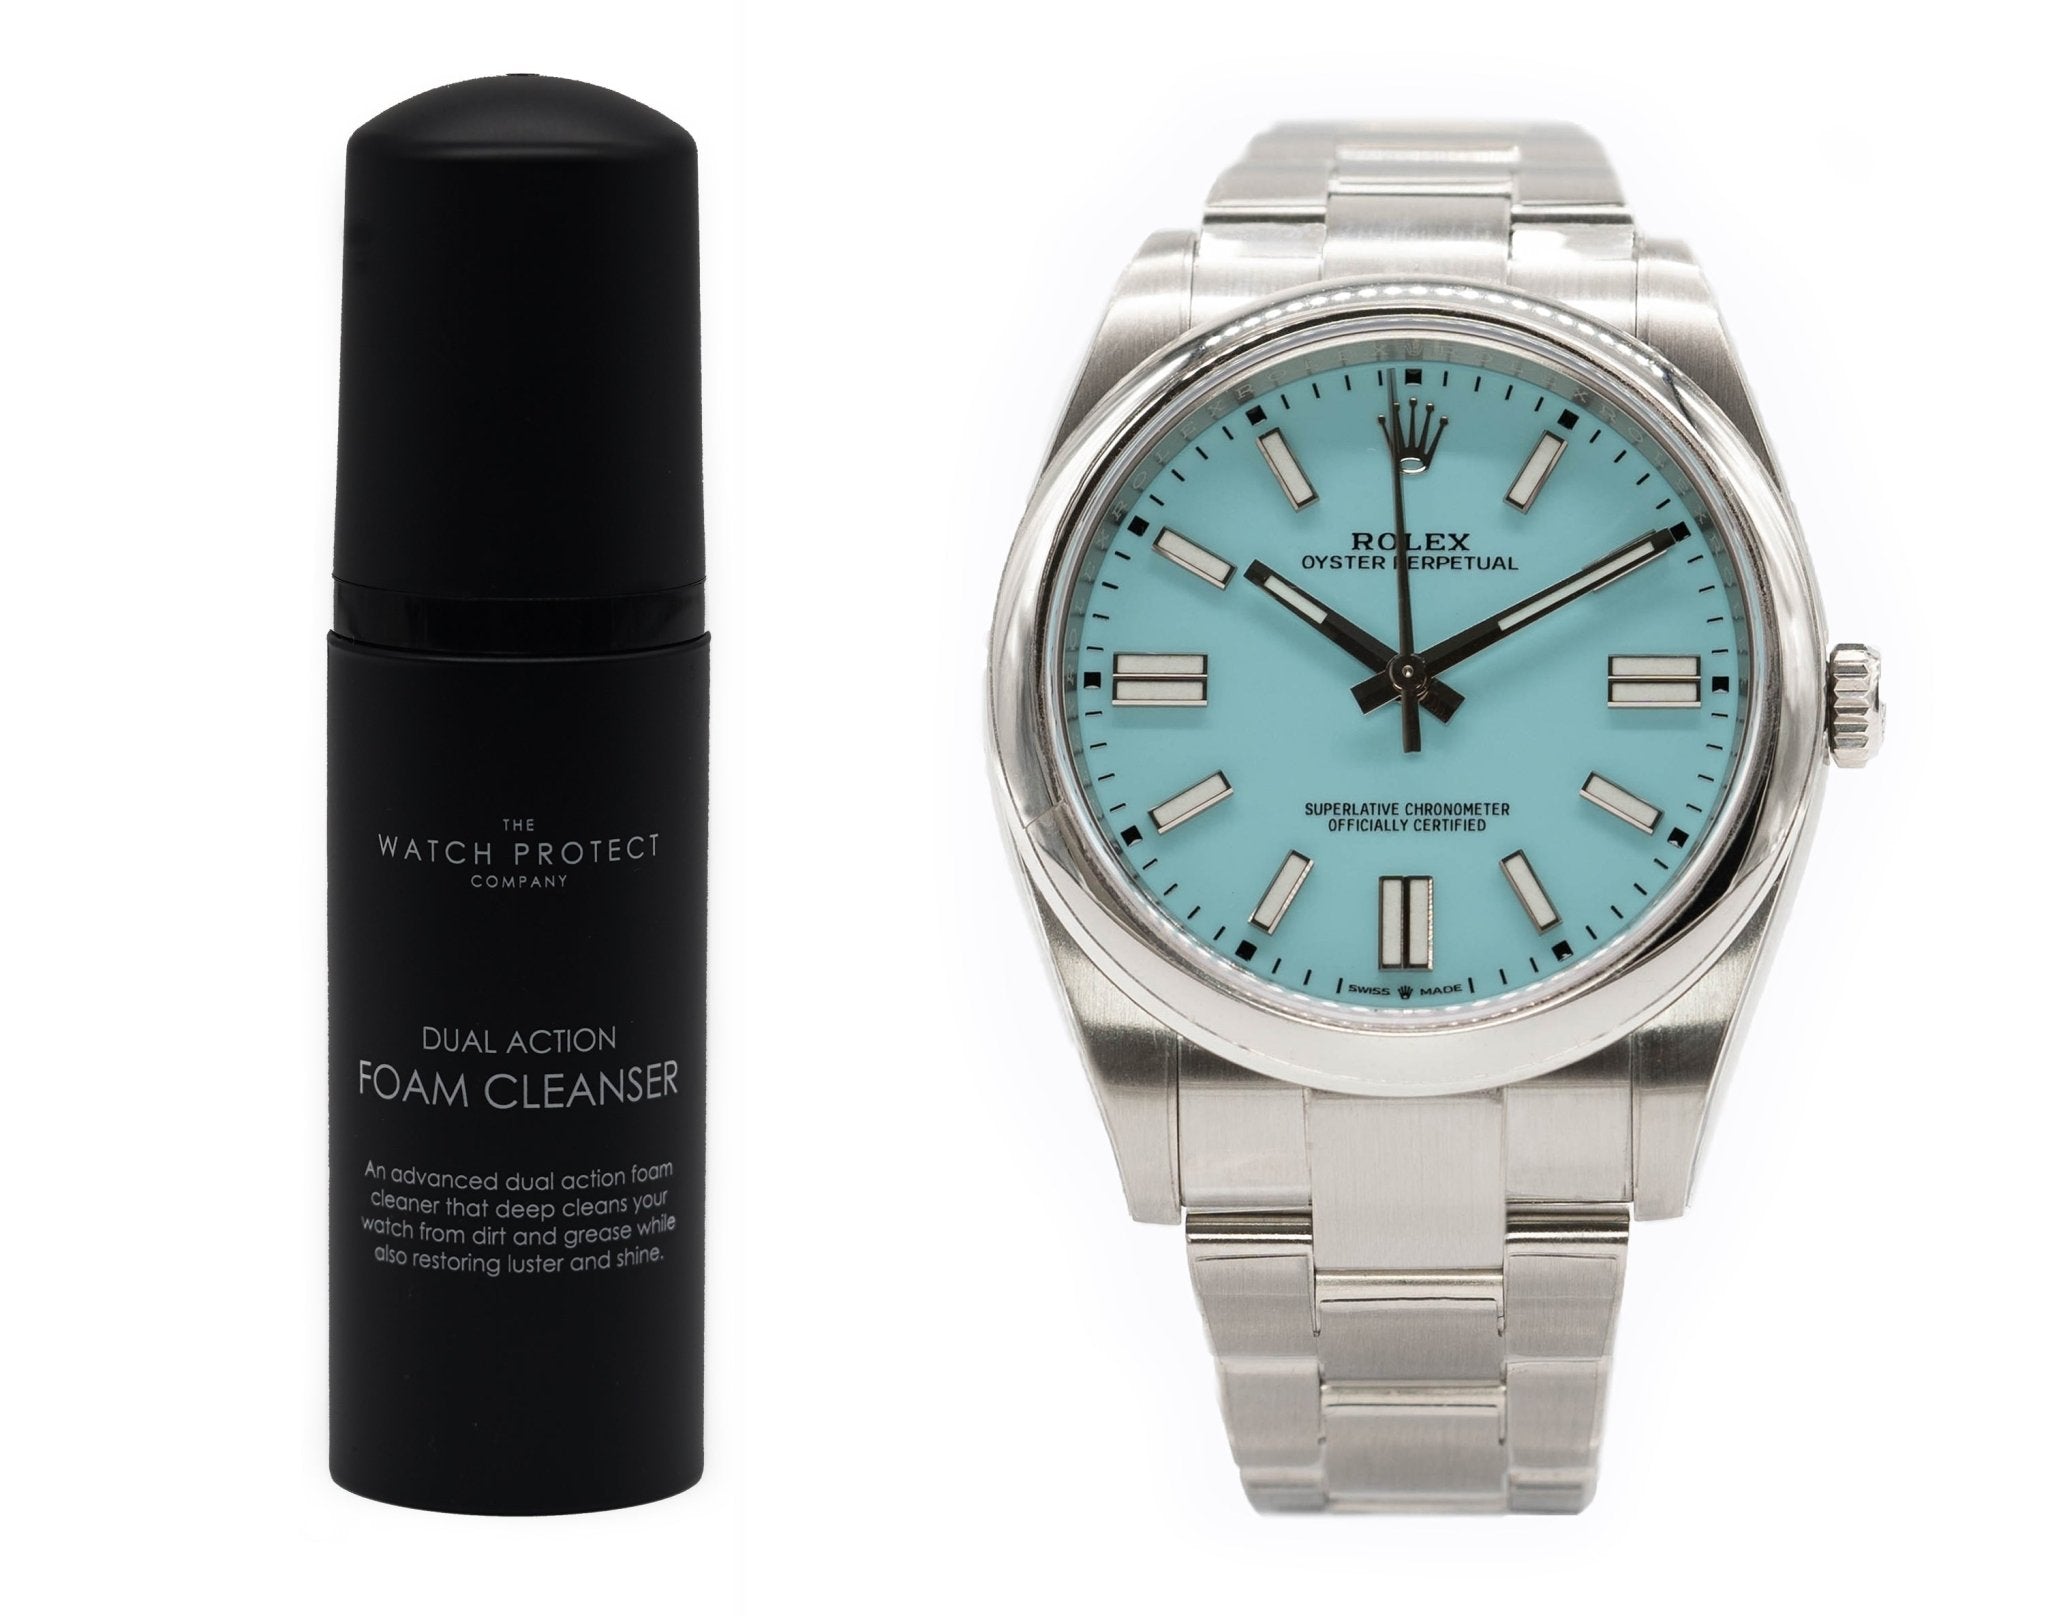 DUAL ACTION FOAM CLEANER & ROLEX OYSTER PERPETUAL 41 124300 - TIER 3 - WATCH PROTECTION KIT BUNDLE - The Watch Protect Company